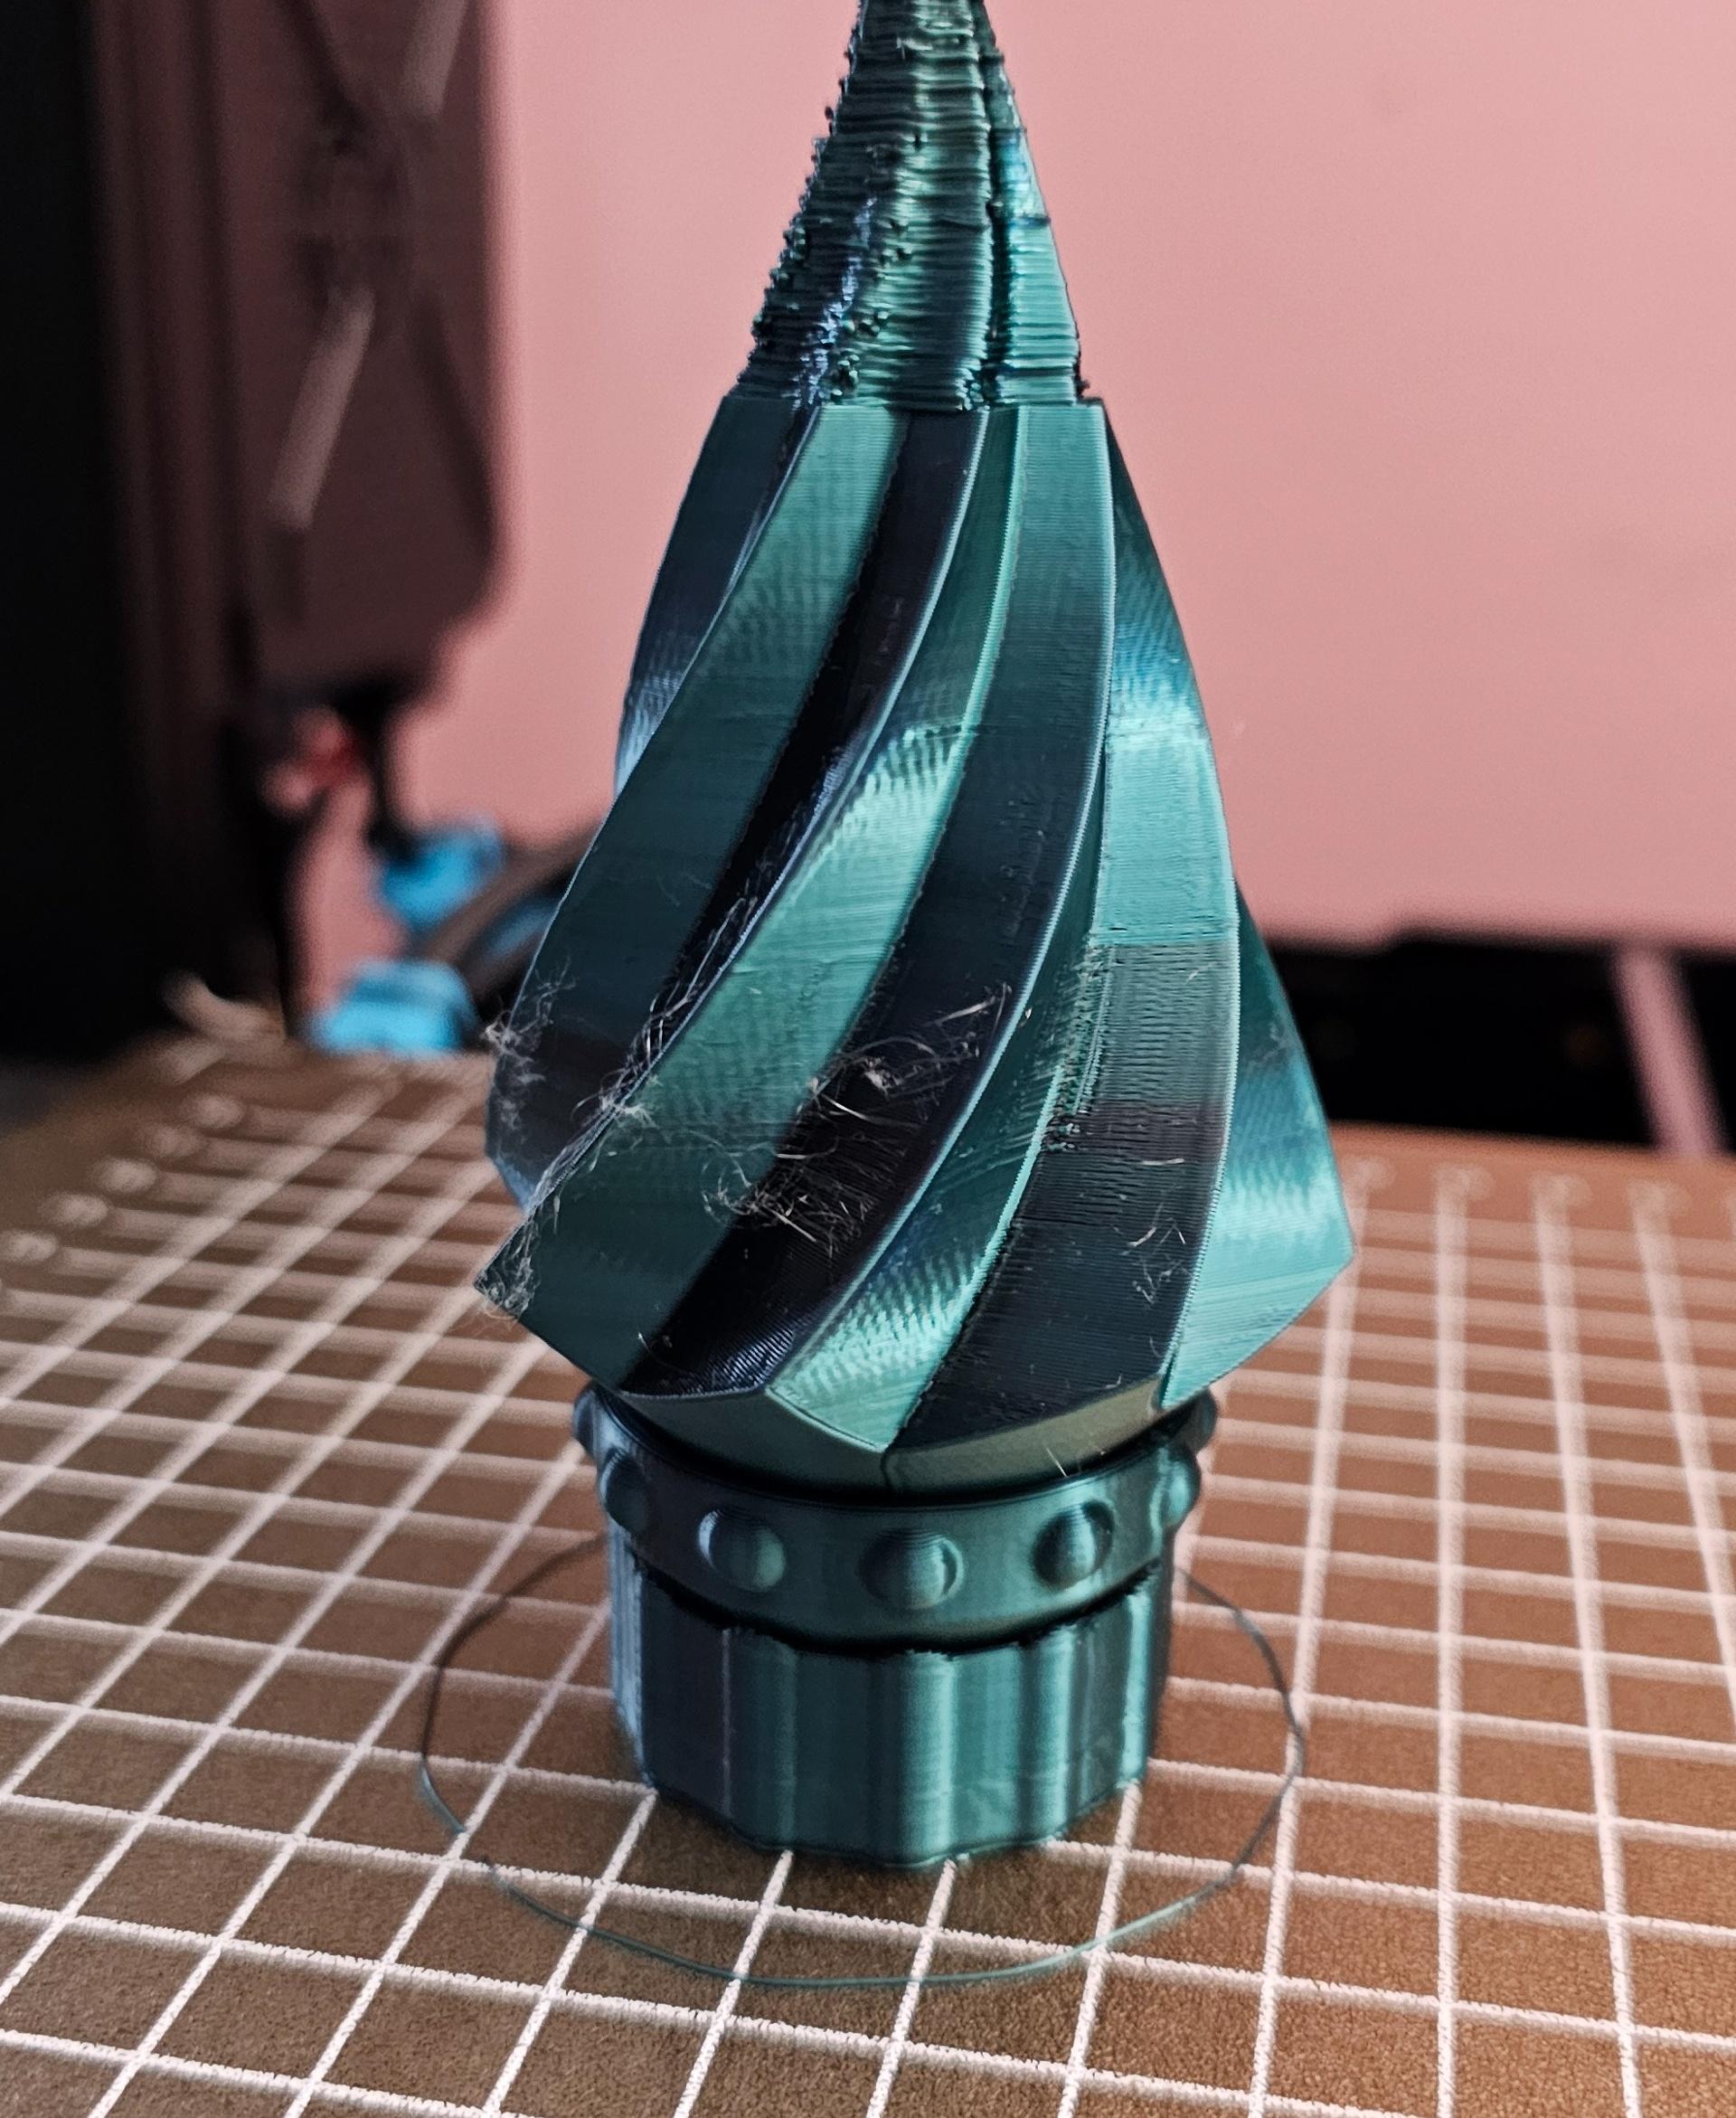 Planetary Tree - Mini - It was printing really well until the tree portion started wobbling at around 90% complete.
3 of the 4 outer gears moved freely, took a bit of persuasion to get the last one working.
Figured I'd post the make anyway.
Might try again and use glue stick to ensure it stays firmly anchored to the PEI sheet while printing.  - 3d model